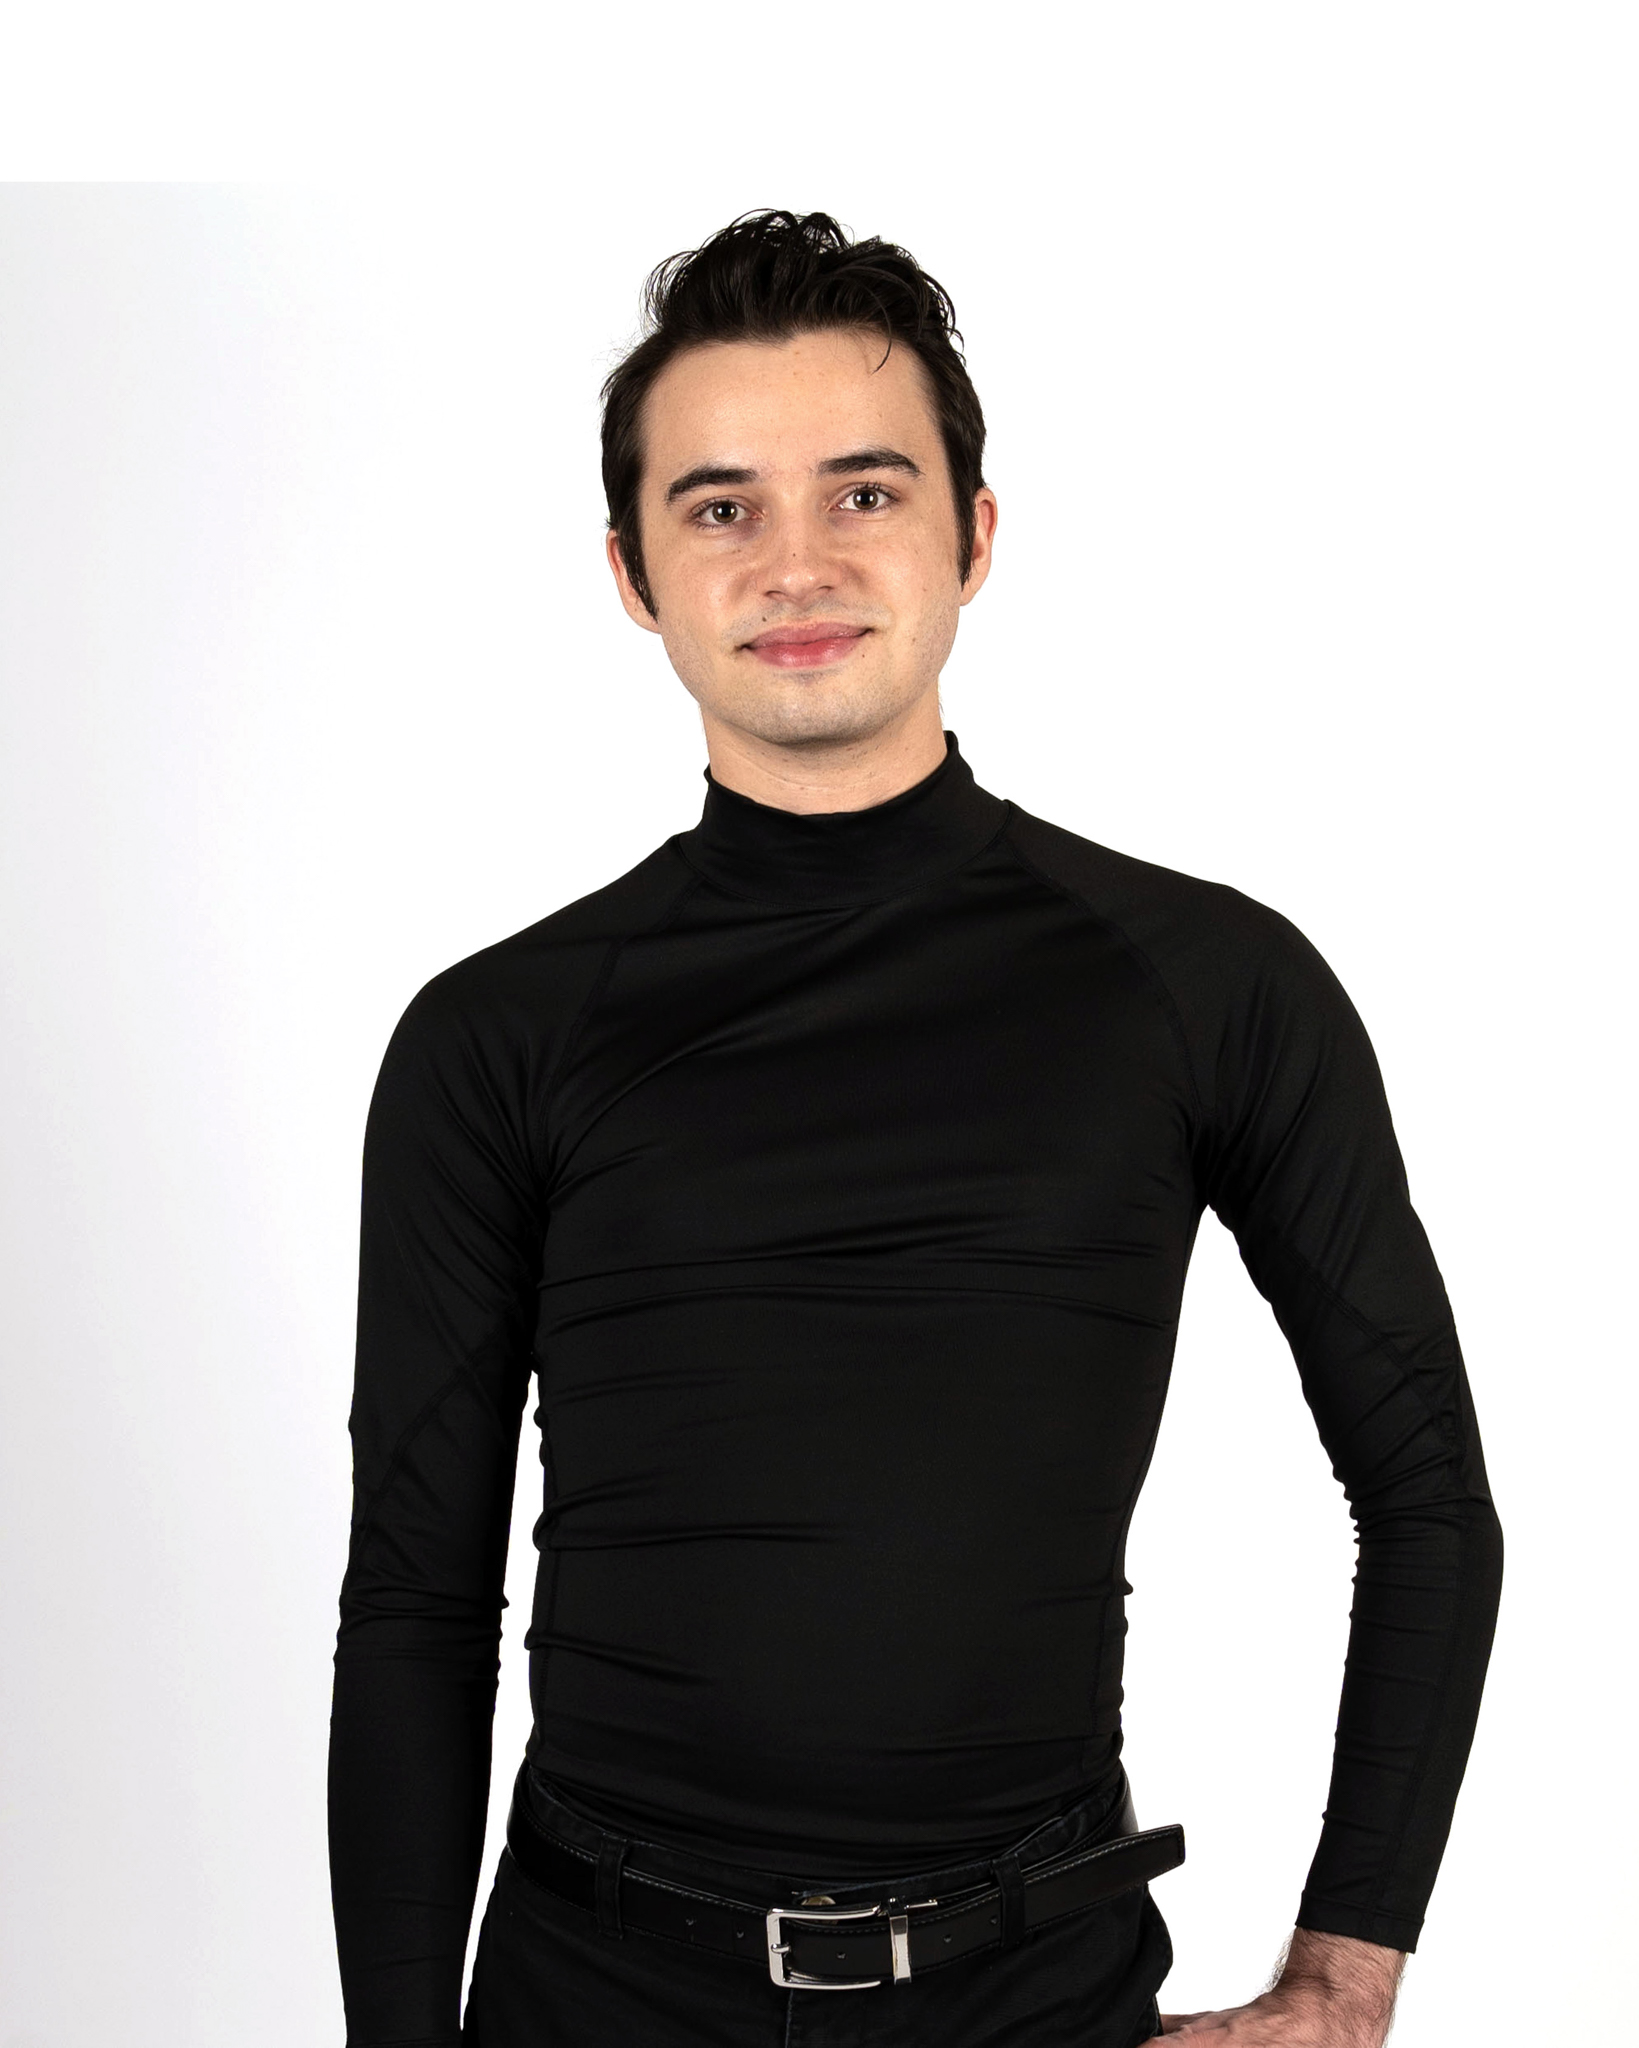 Alejandro Gonzalez, Man, posing casually with light smile in all-black outfit